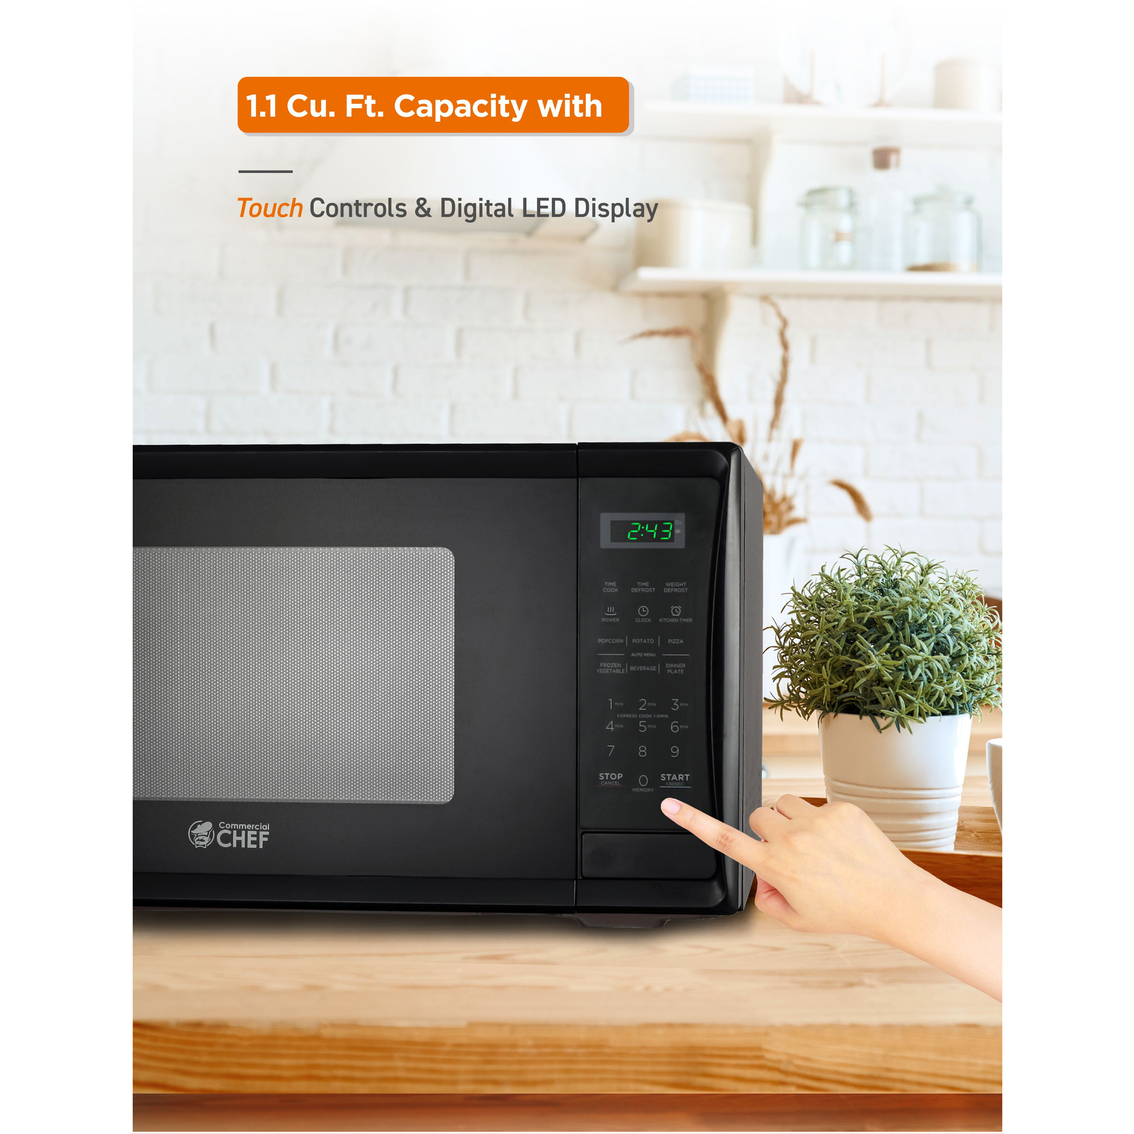 Commercial Chef 1.1 Cu. Ft. Countertop Microwave Oven - Image 6 of 7